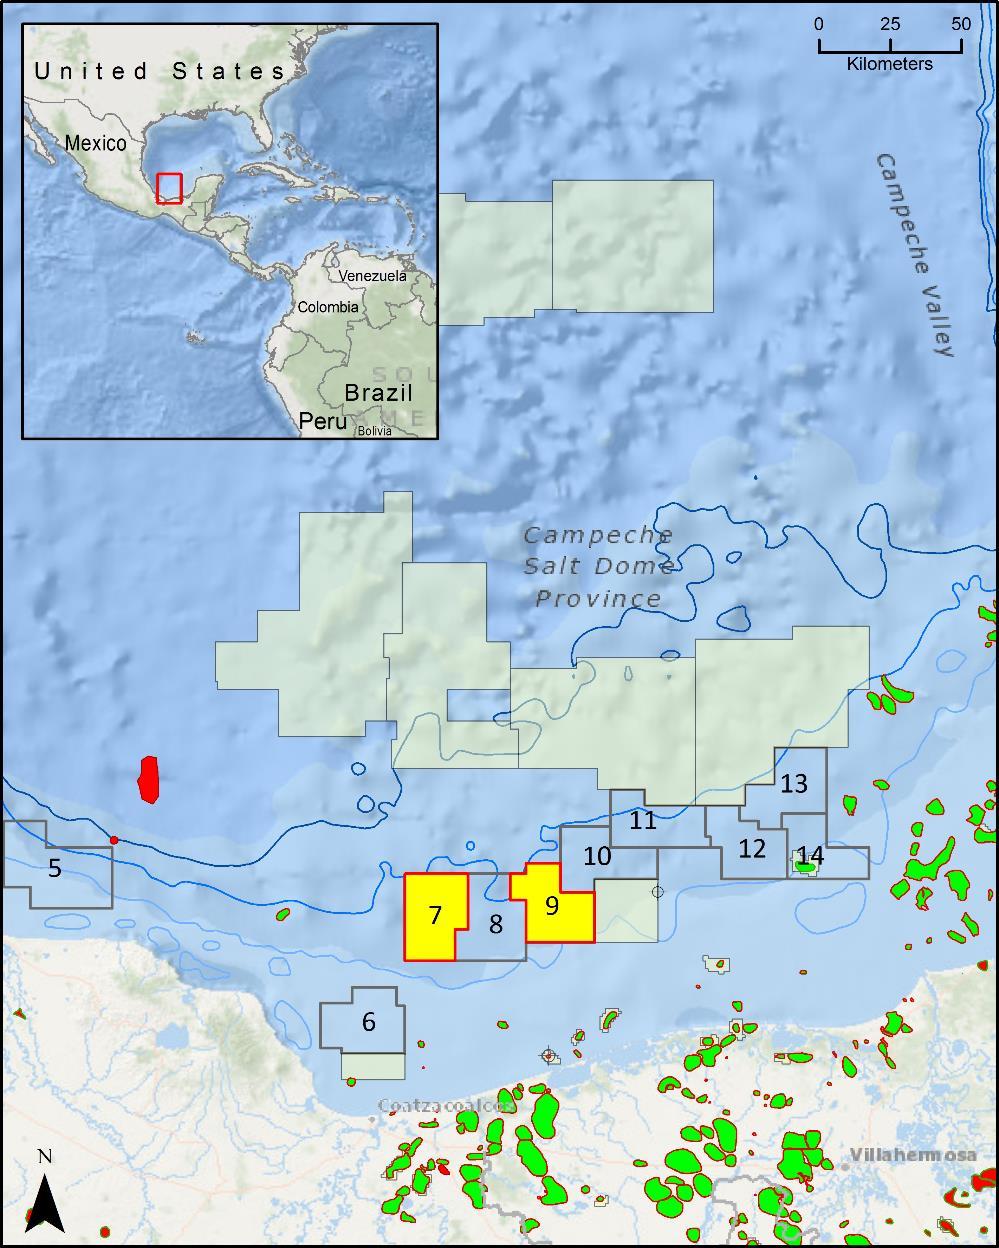 Exploration Mexico Atlantic Margin Mexico Entry into highly prolific, oil-prone Sureste basin Under-explored relative to U.S. Gulf of Mexico Shallow water (wd 100-500m) ~50 billion boe produced to date in basin >12.